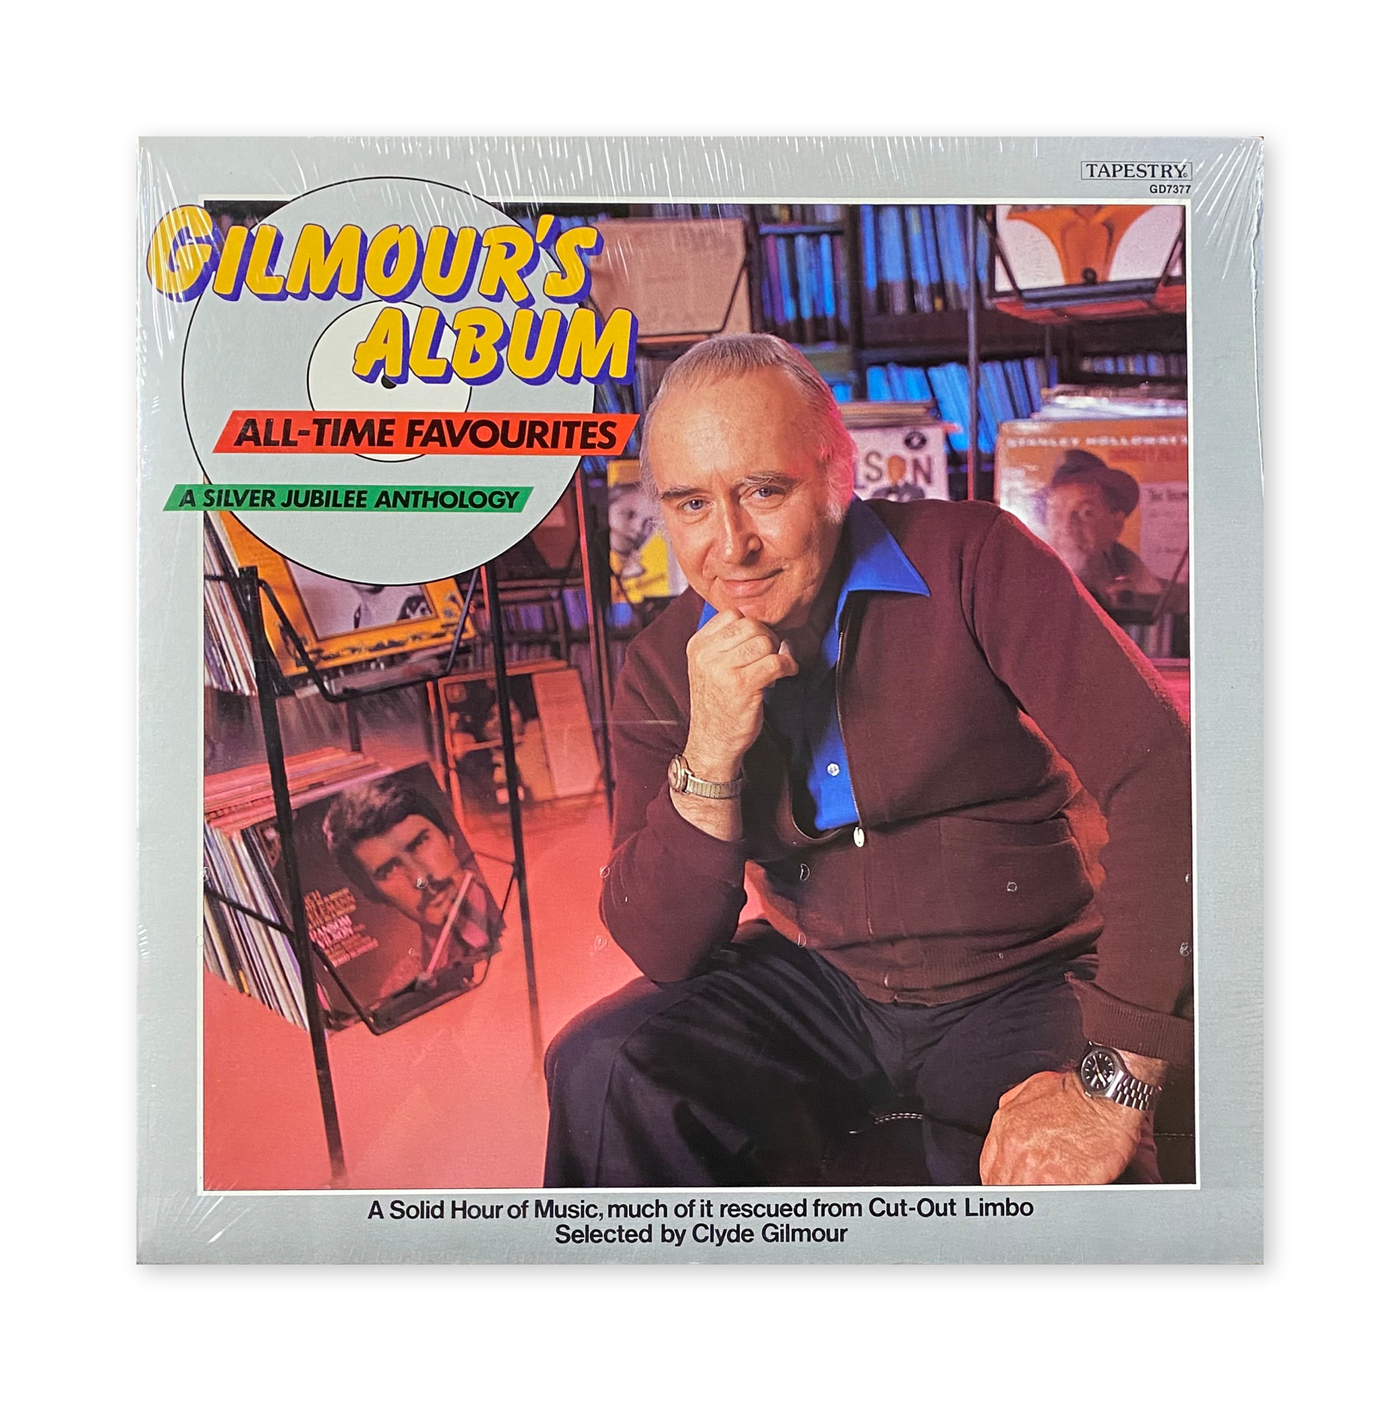 Various - Gilmour's Album - All-Time Favourites - A Silver Jubilee Anthology